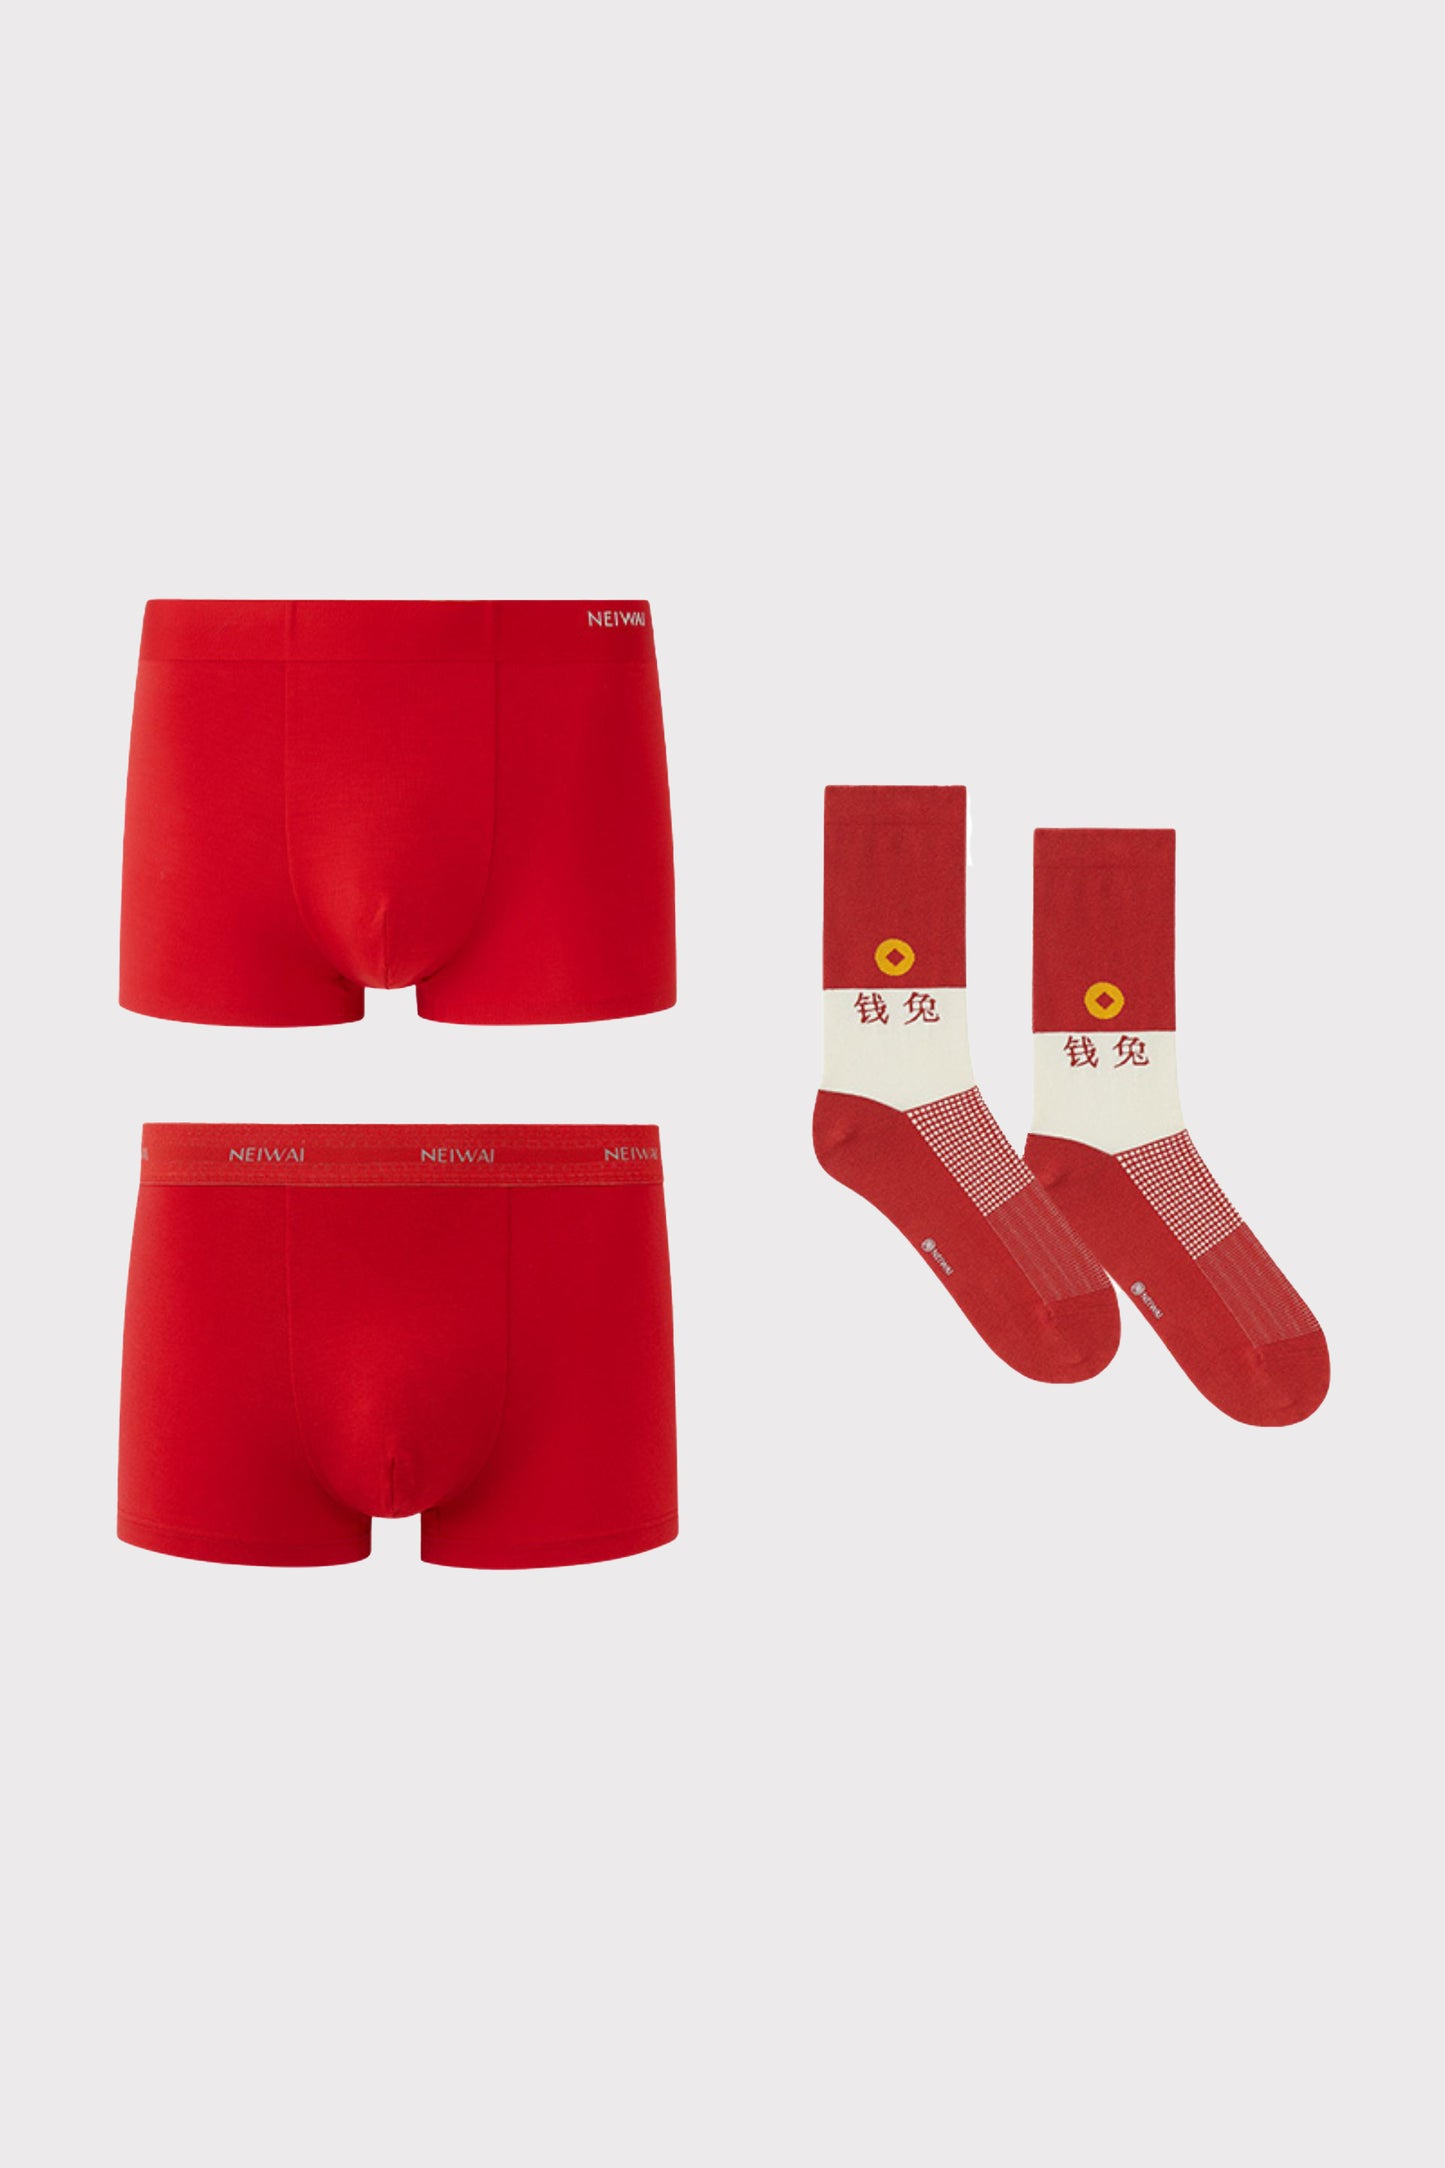 Two pairs of red men's underwear, a pair of red men's socks for the Year of the Rabbit